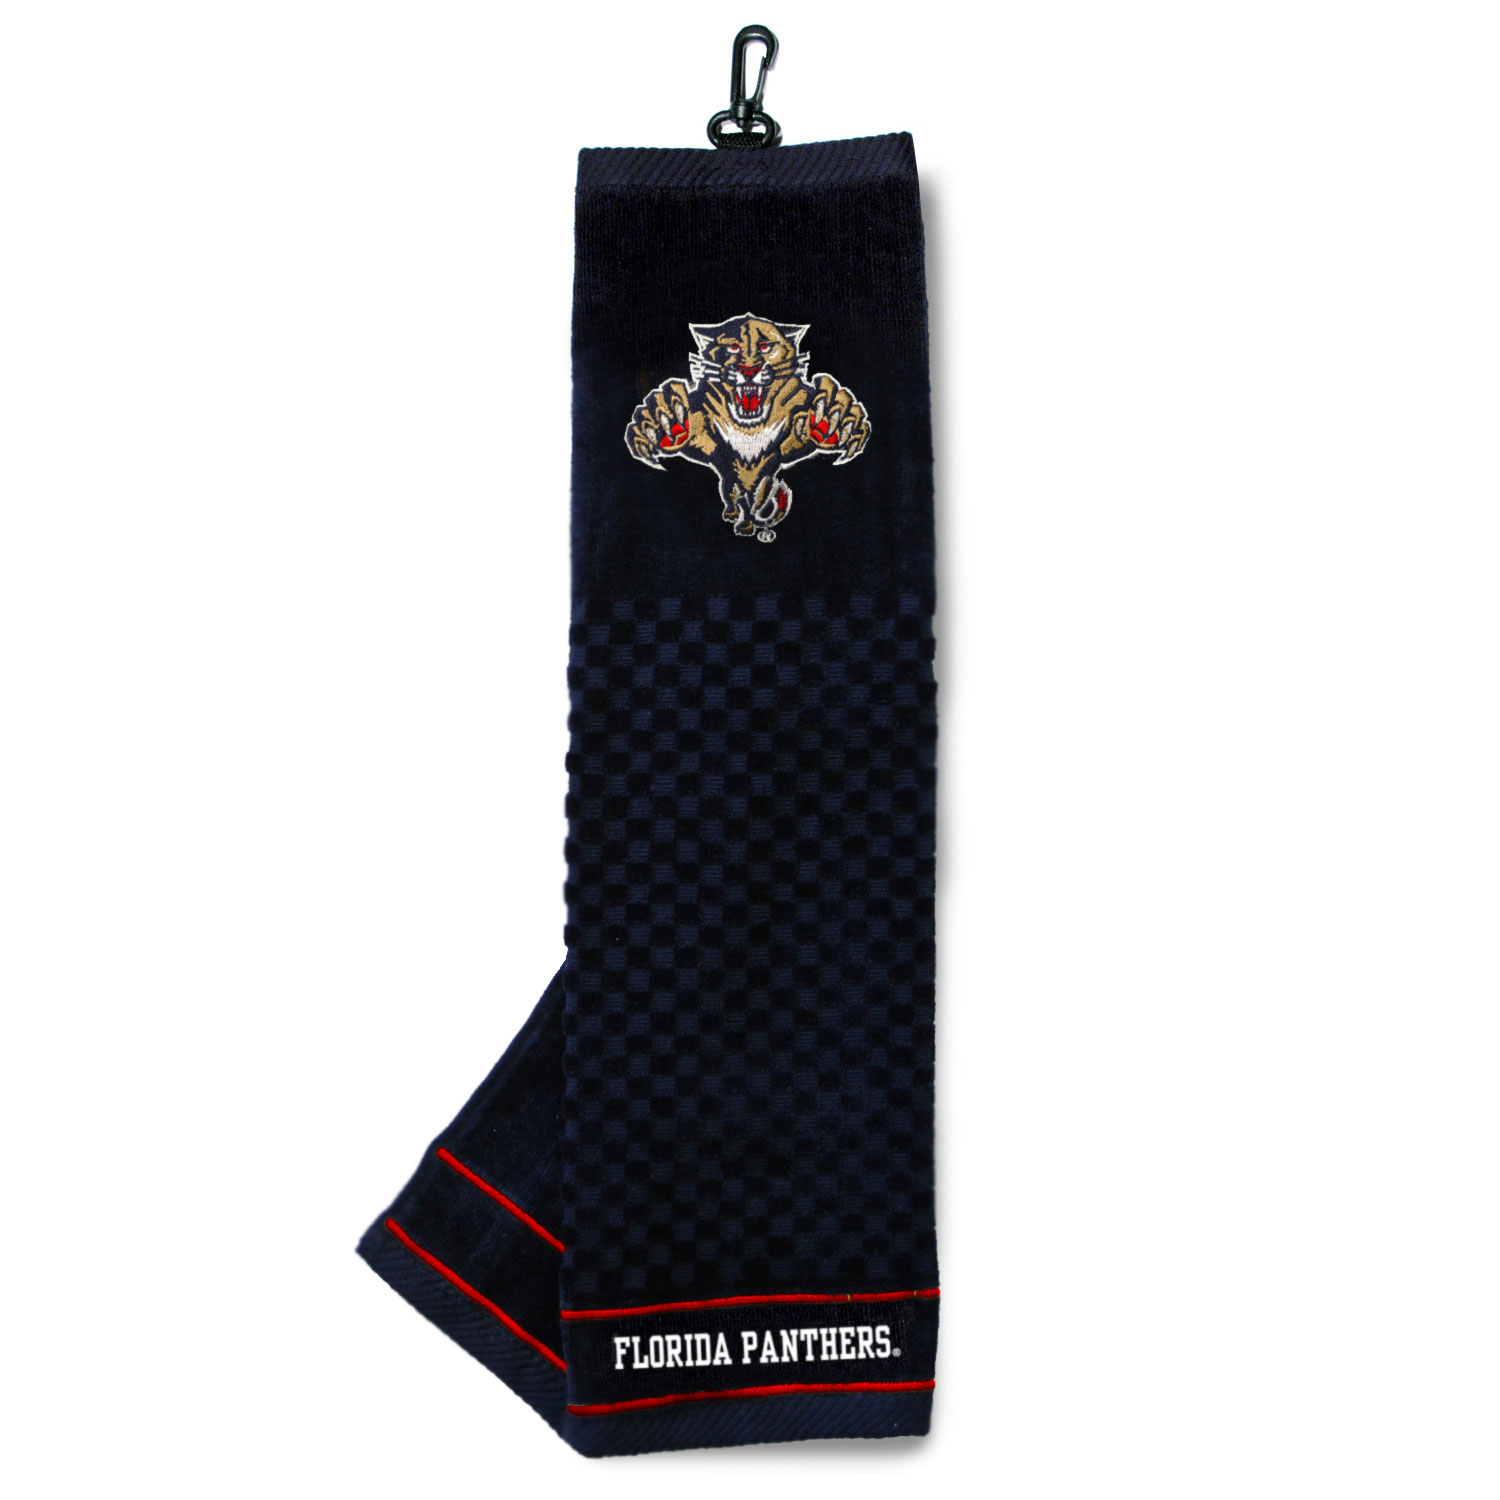 Florida Panthers Embroidered Towel